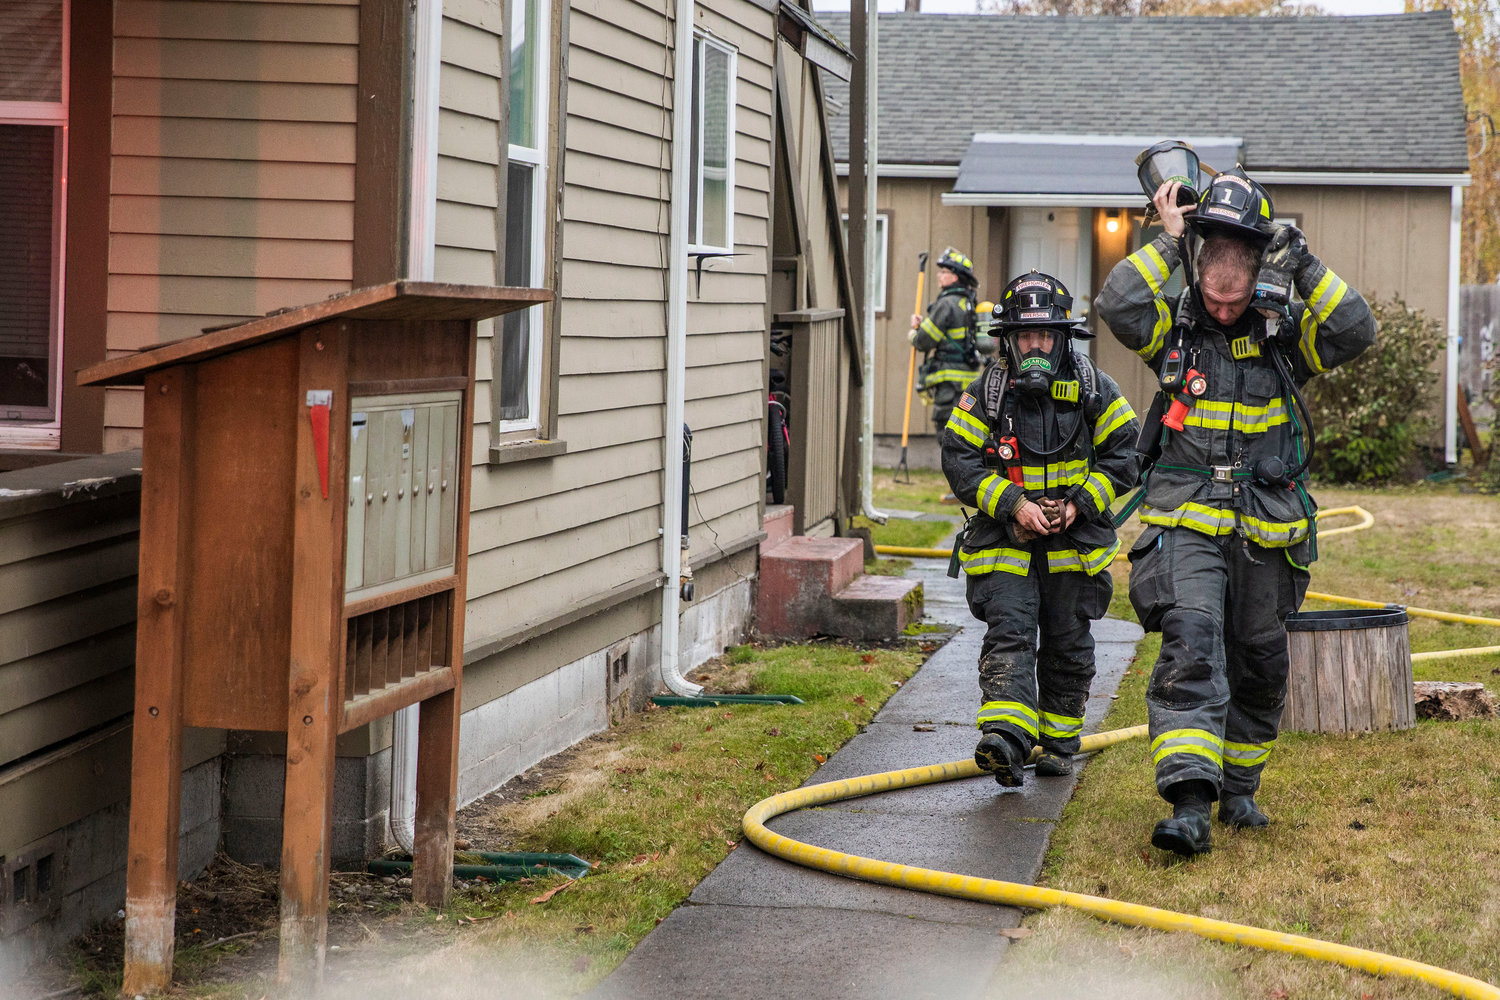 Firefighters adjust gear while responding to the scene of a residential fire in the 200 block of North Rock Street in Centralia on Friday.